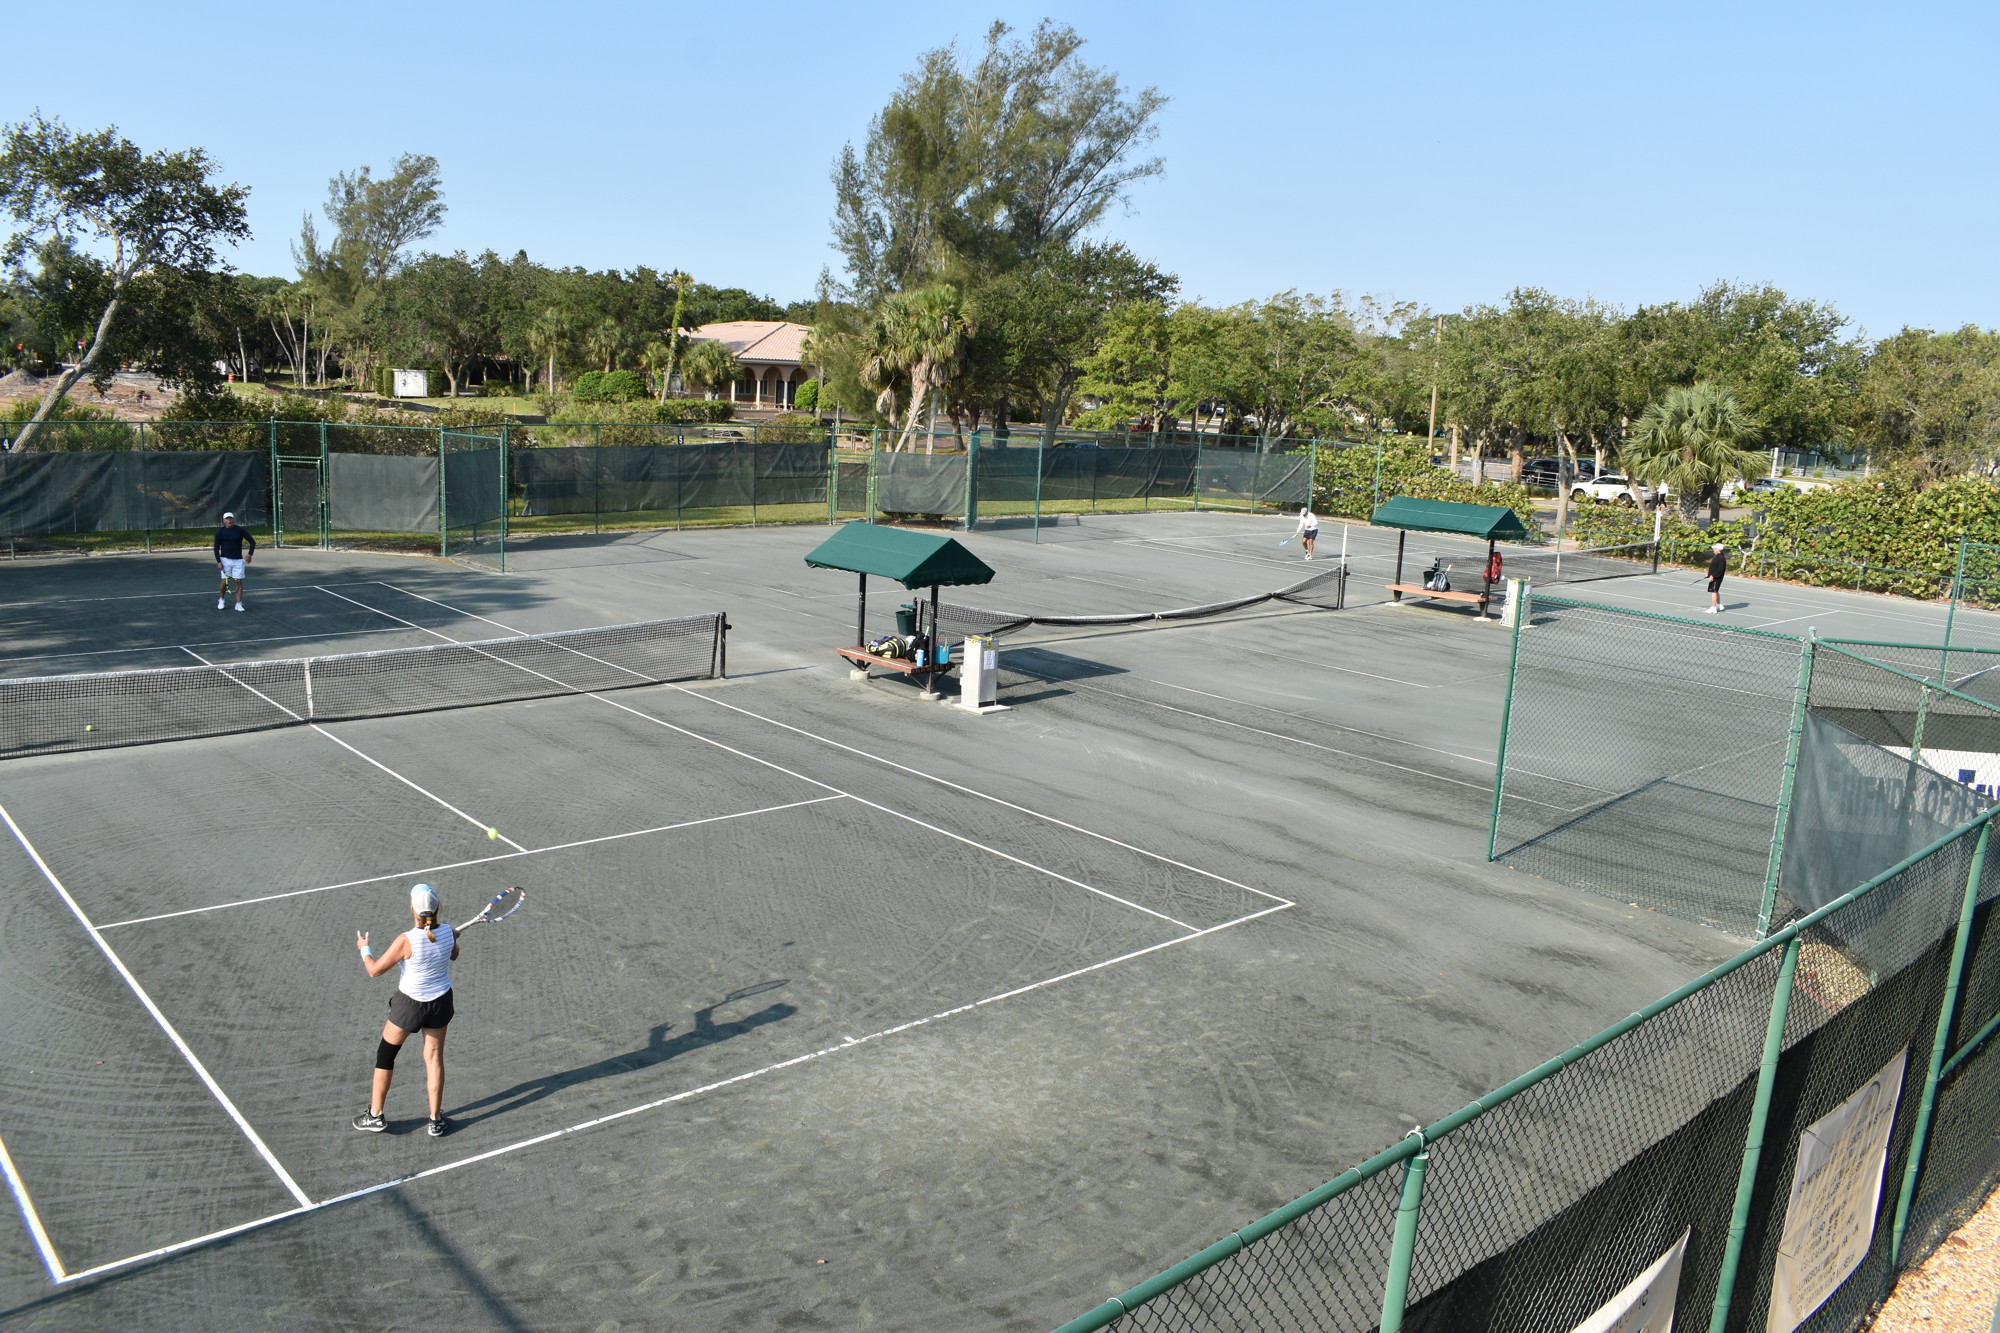 Because of the restrictions to prevent the spread of the COVID-19, every other court is in use at the Longboat Key Tennis Center.